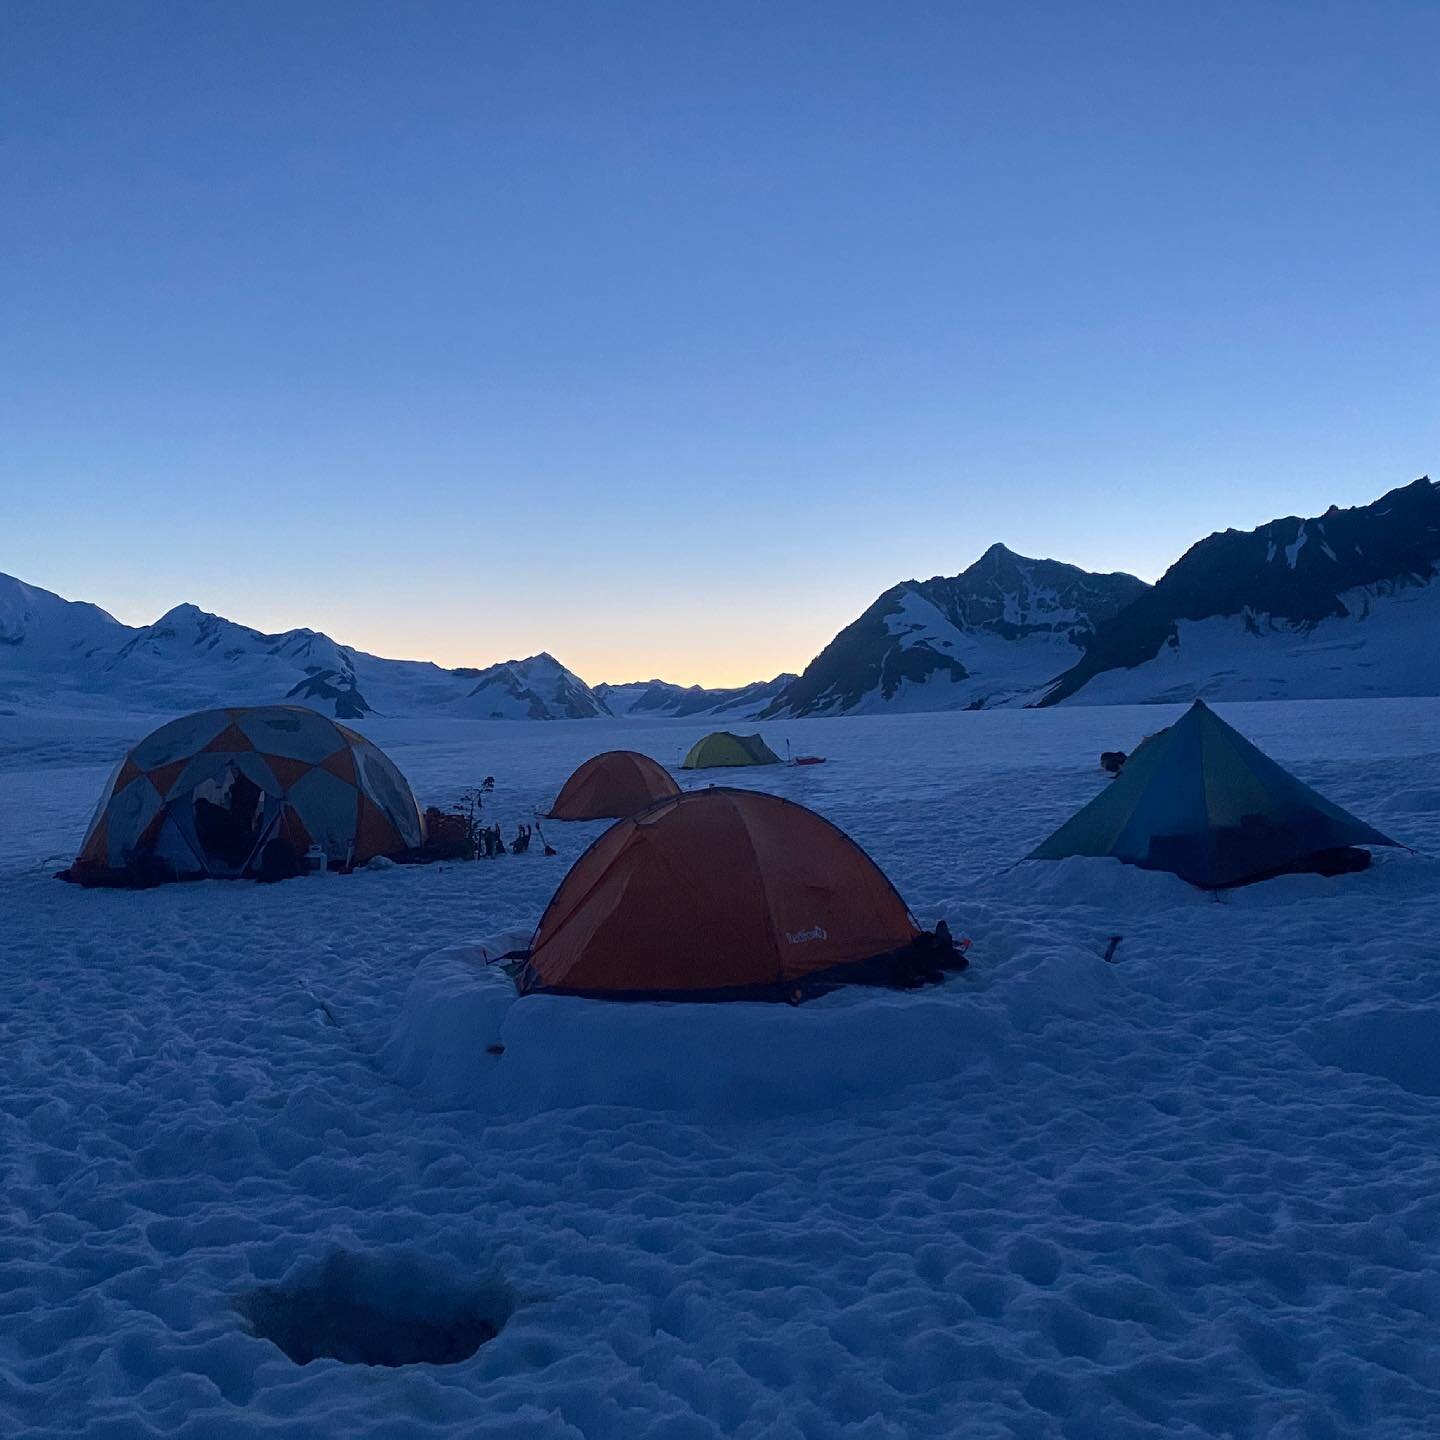 Canada Day at 2am on the Hubbard Glacier. Come explore the Kluane Icefields with us next year!